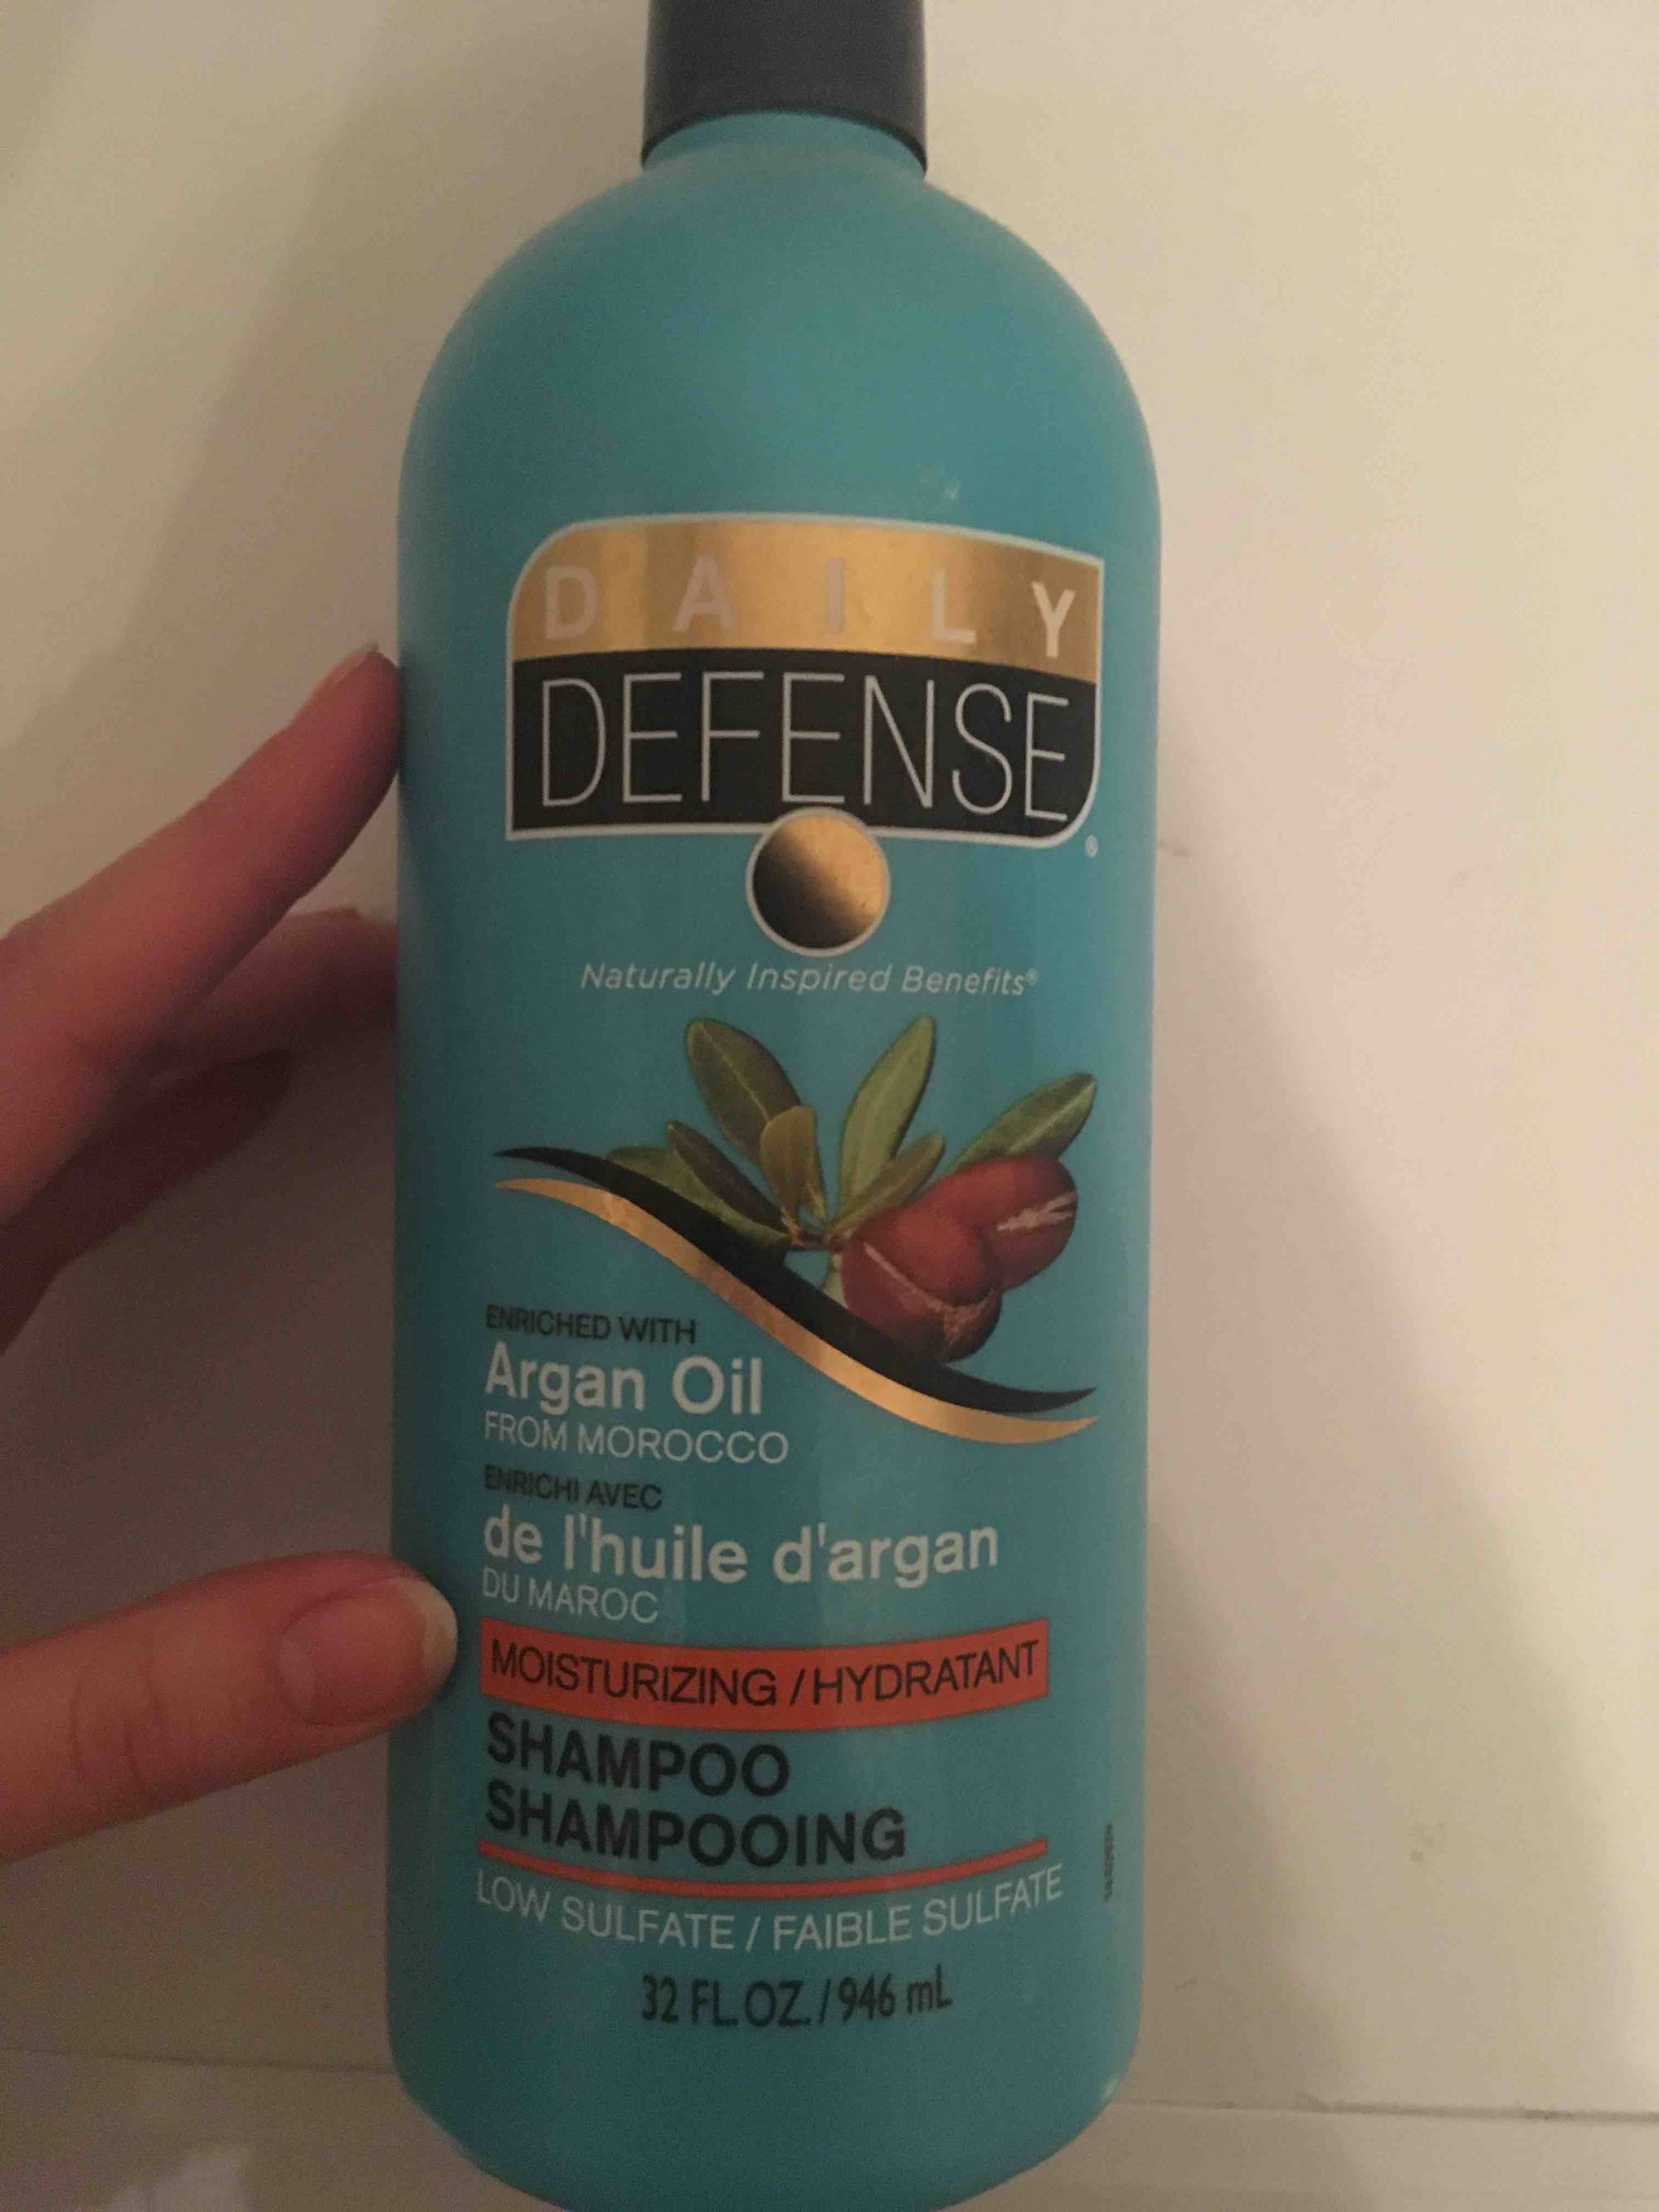 DAILY DEFENSE - Argan oil from Morocco - Shampooing